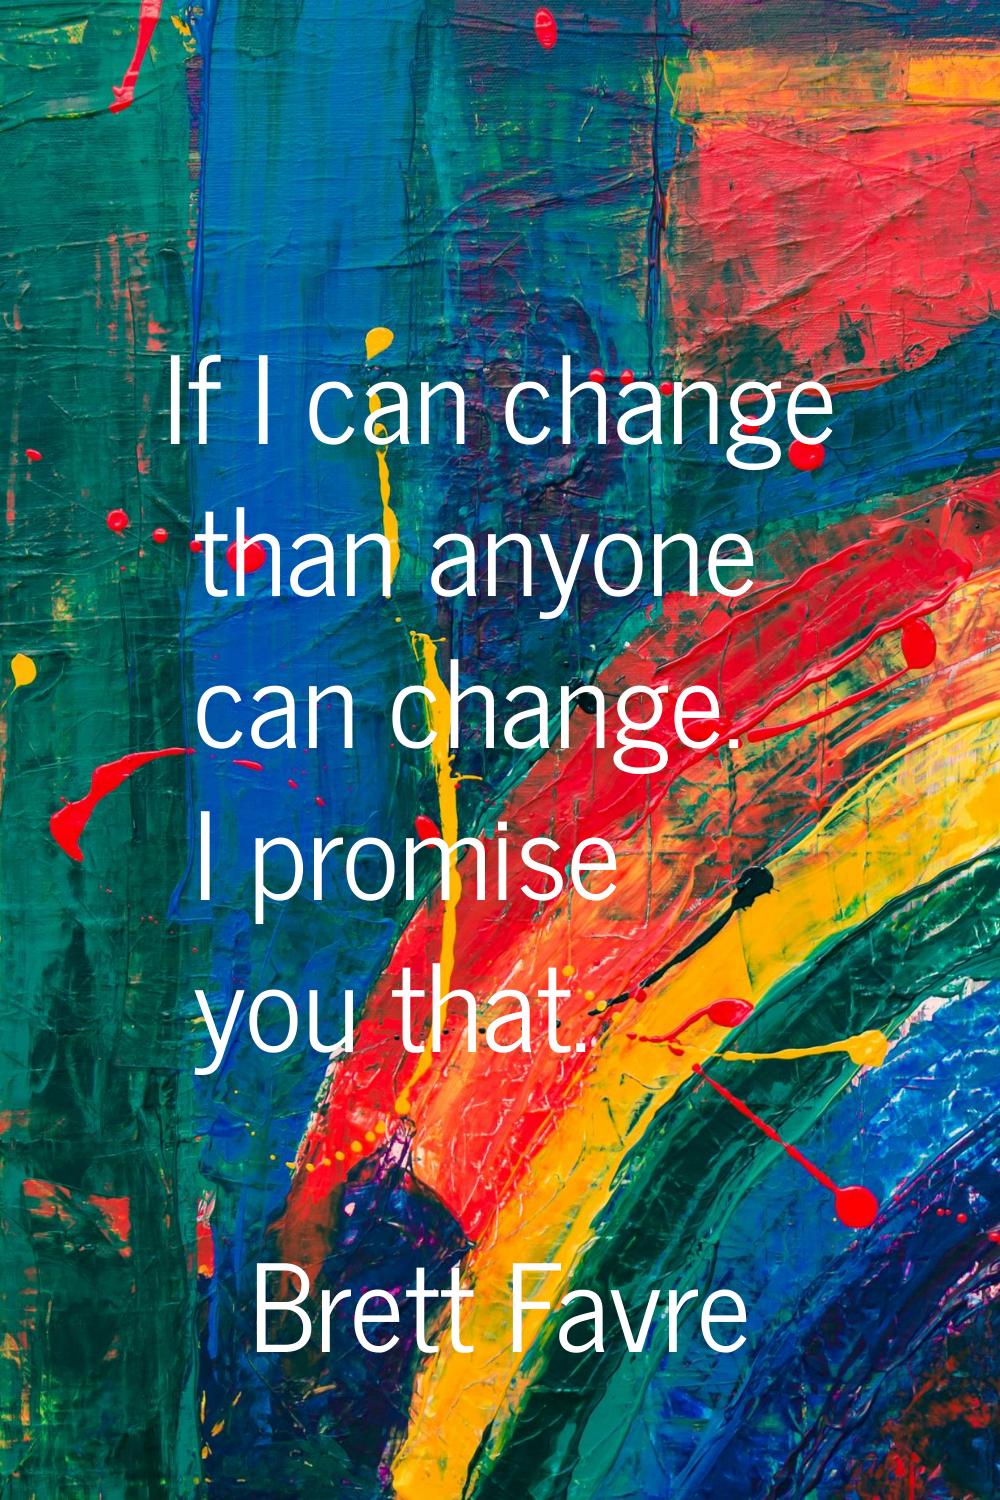 If I can change than anyone can change. I promise you that.